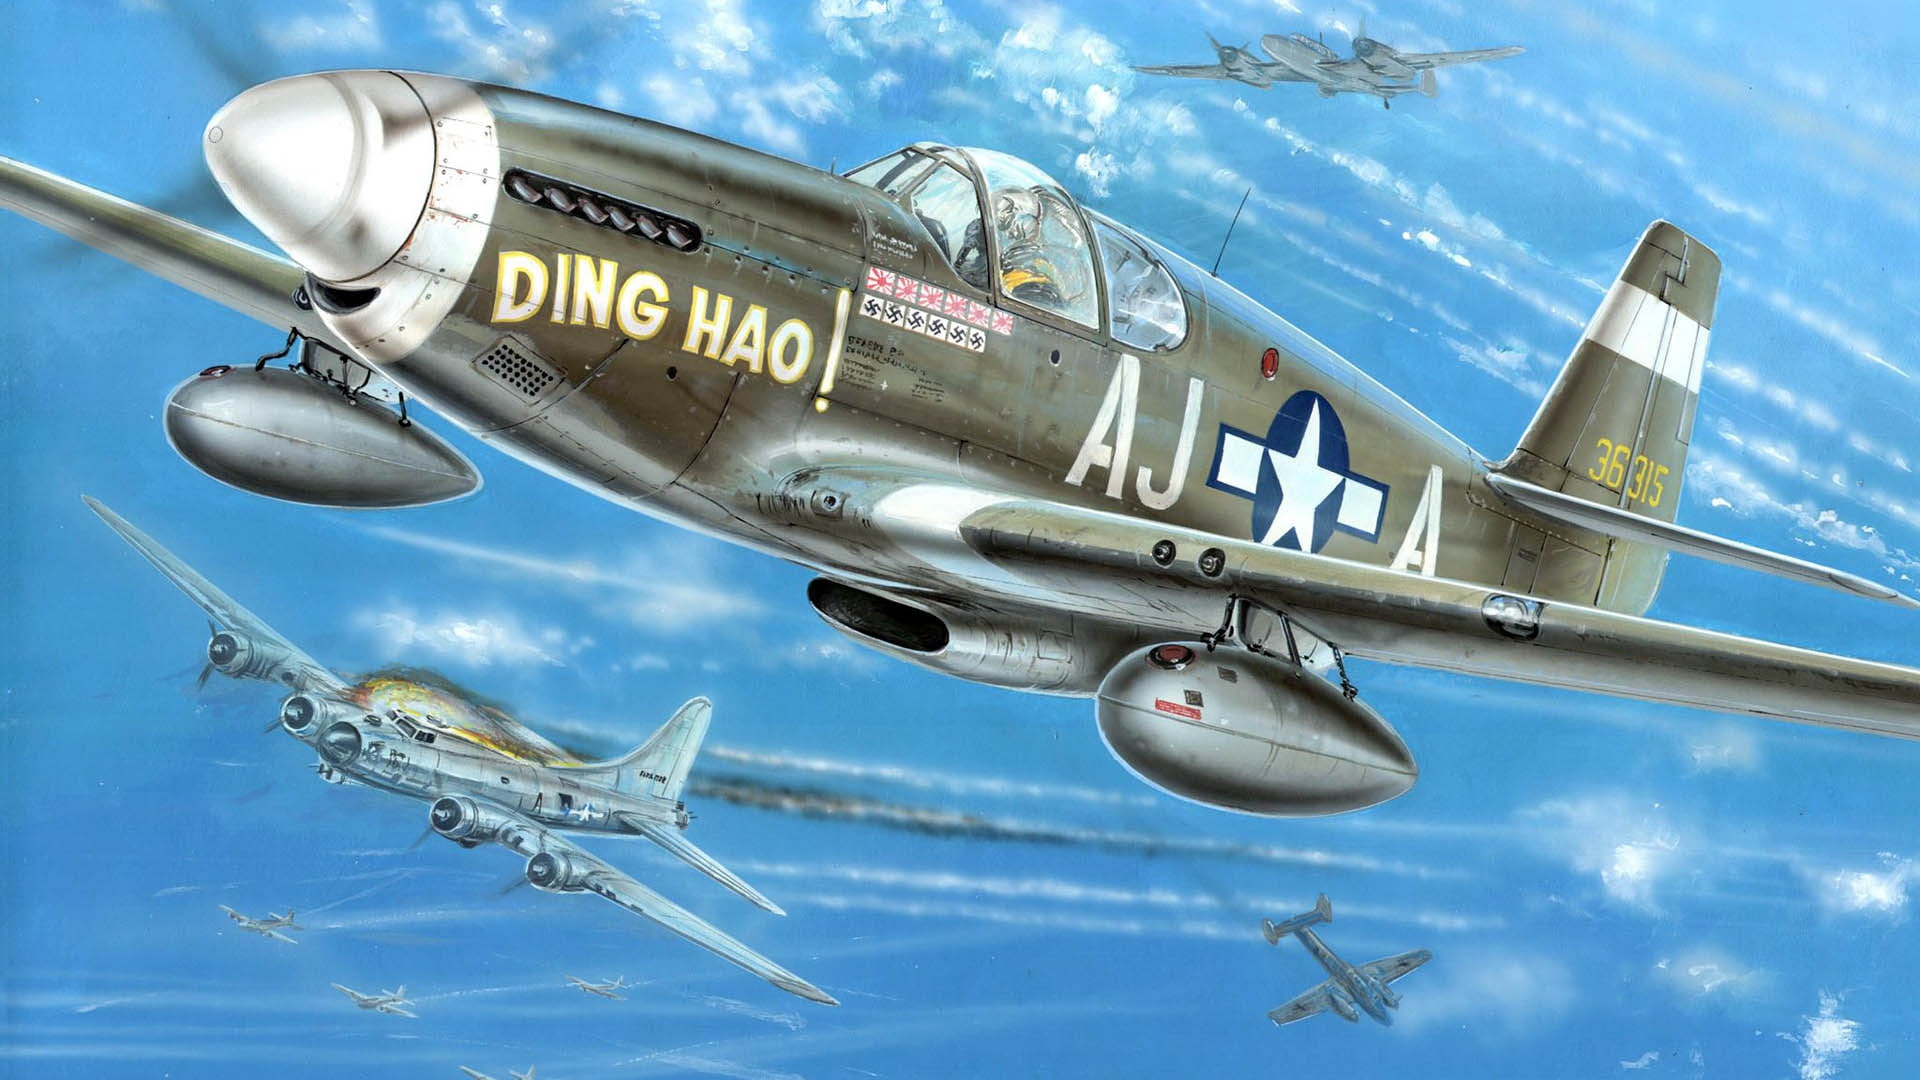 Mustang, UNITED STATES AIR FORCE, North American, during the Second world war